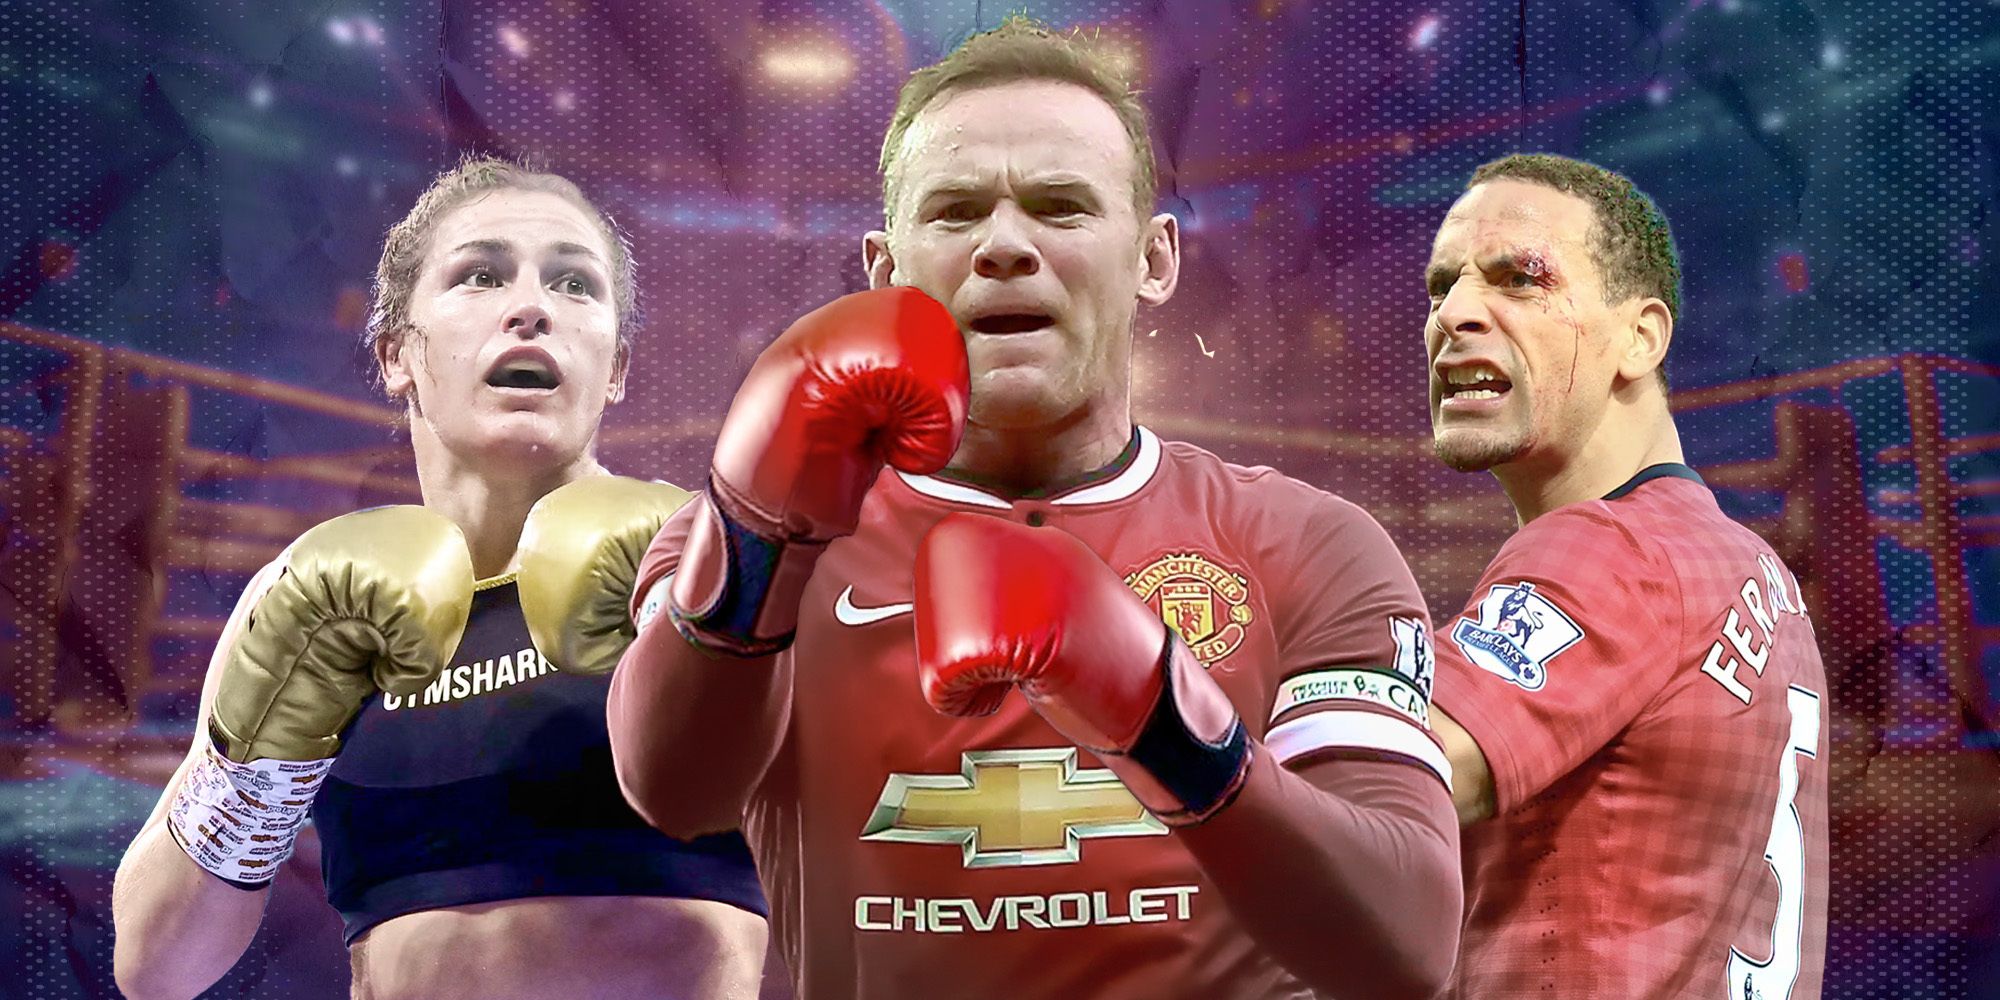 Katie Taylor, Manchester United's Wayne Rooney, and Manchester United's Rio Ferdinand.